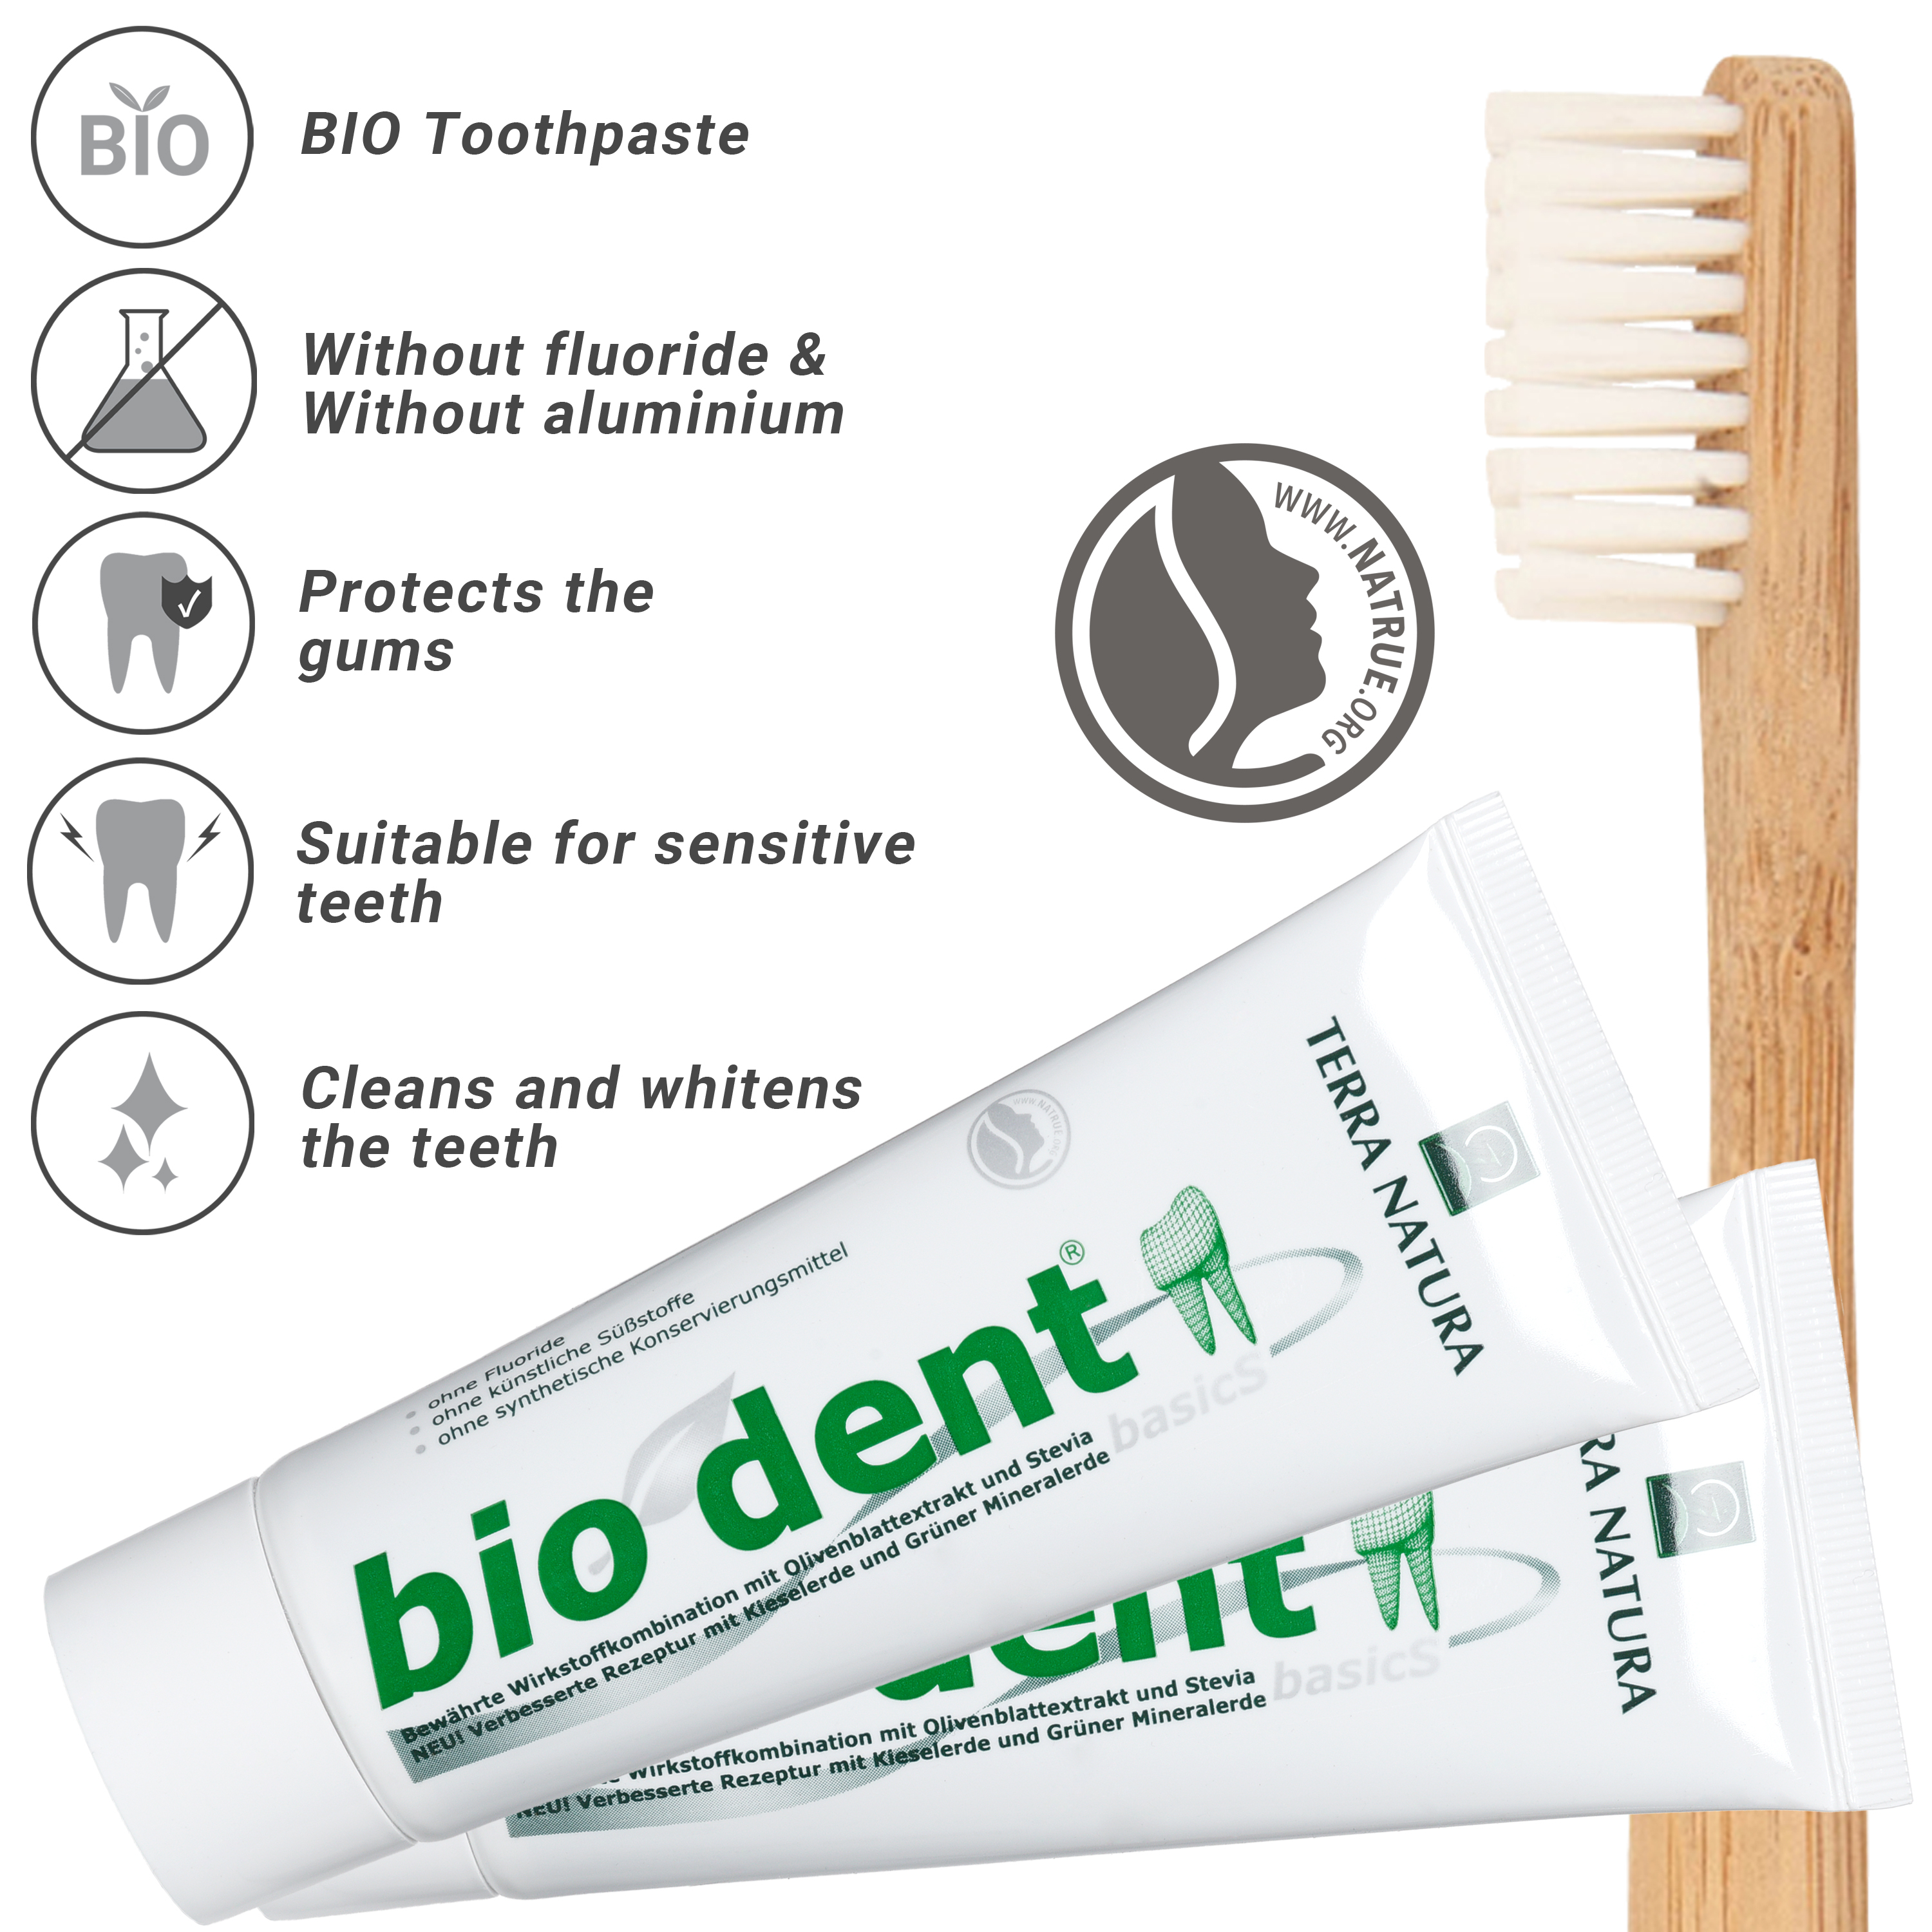 Toothpaste without fluoride Biodent Basics-Terranatura